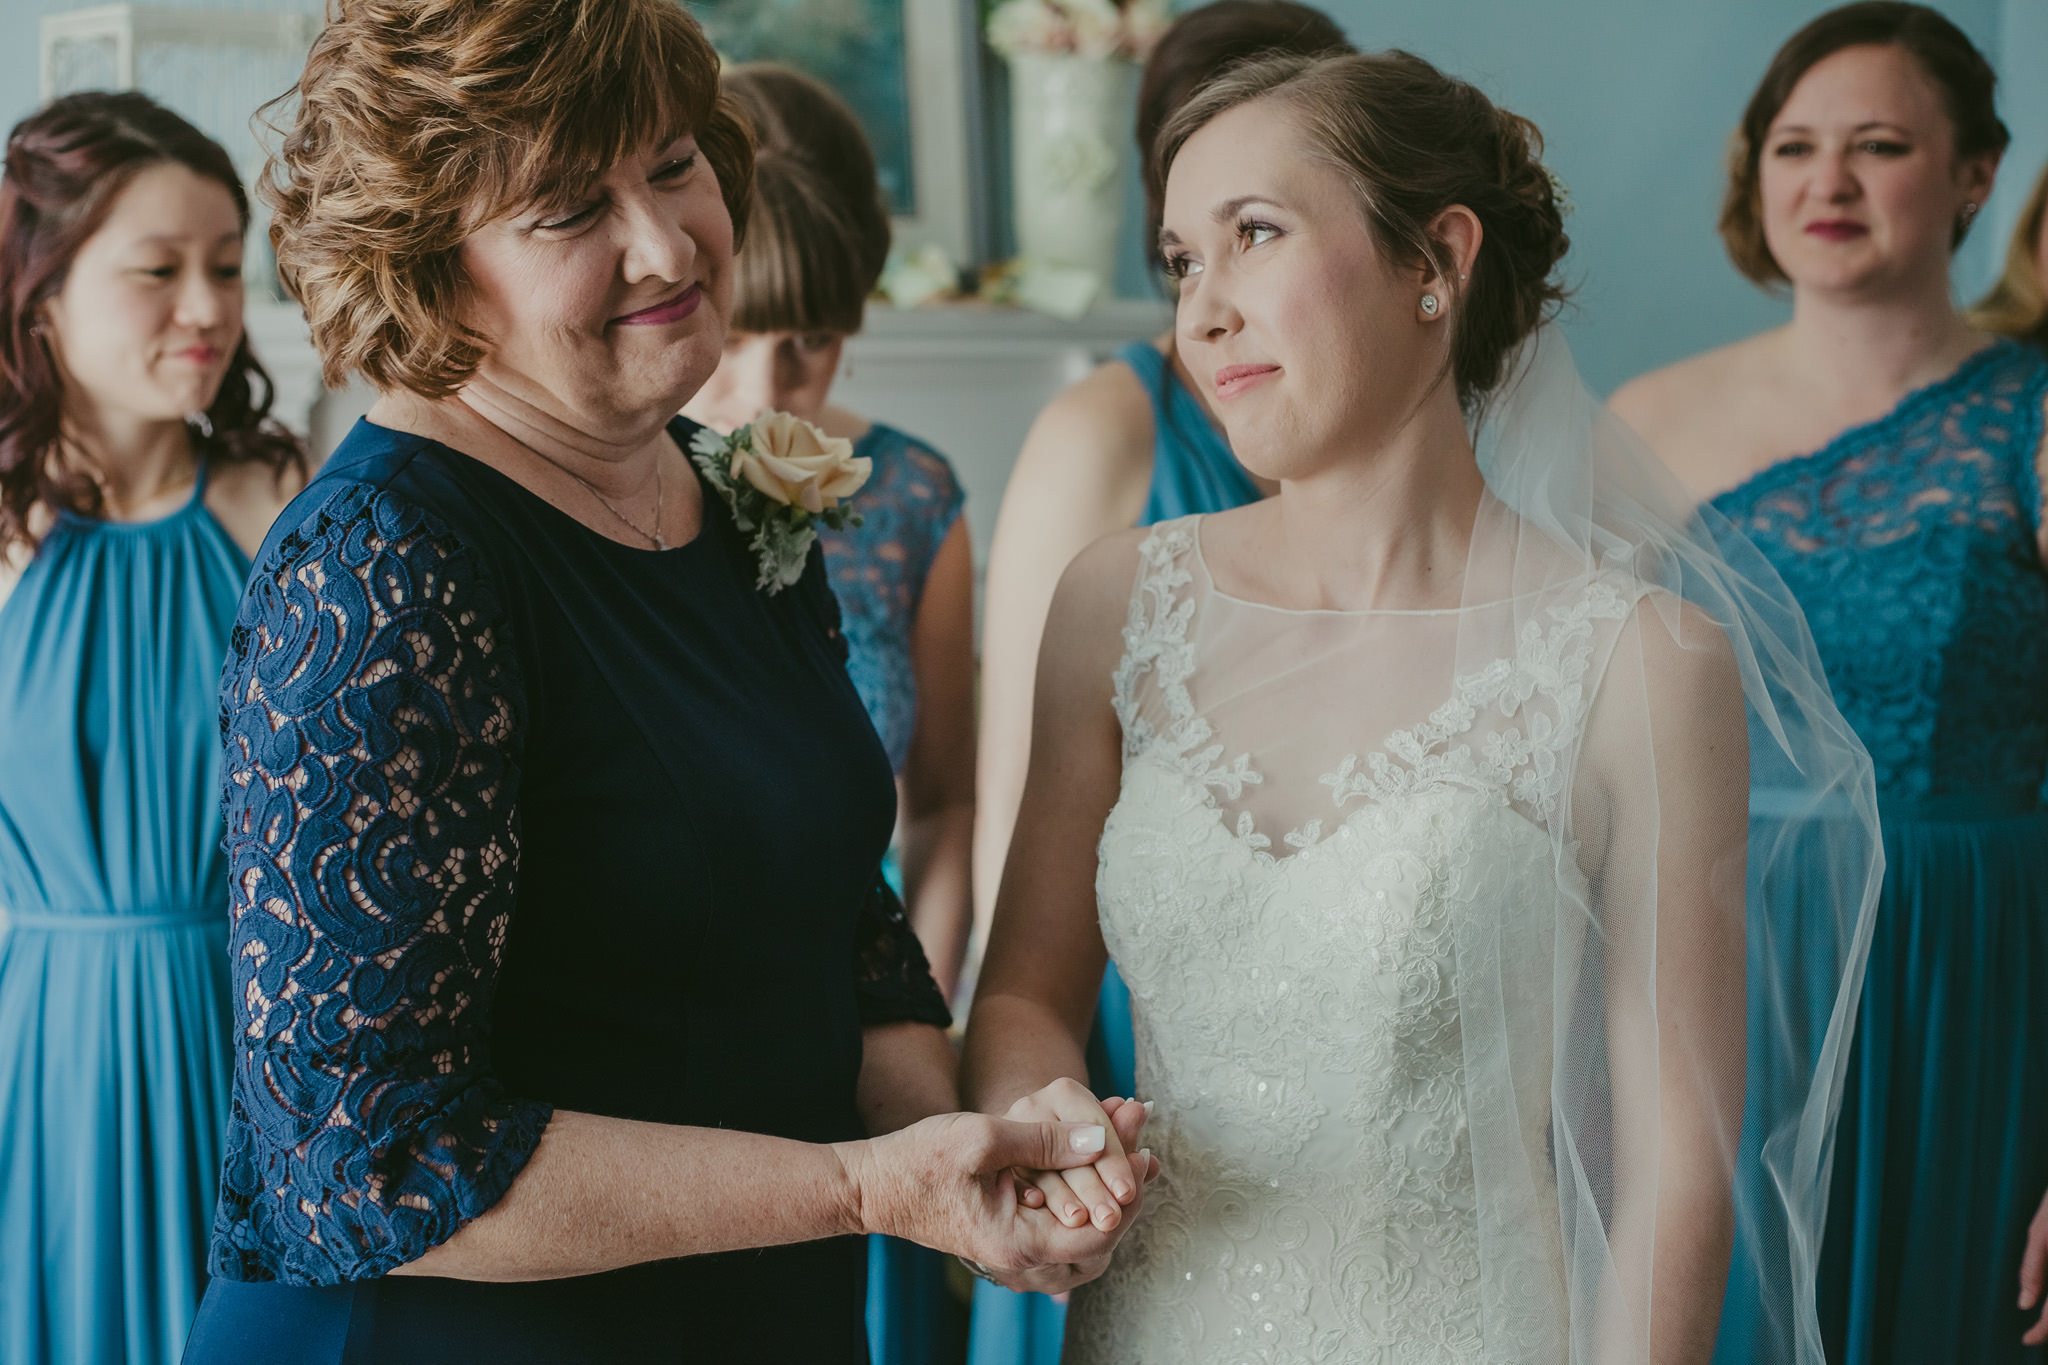 A mother and daughter have a moment before she walks down the isle at the Shuford House in Hickory, NC